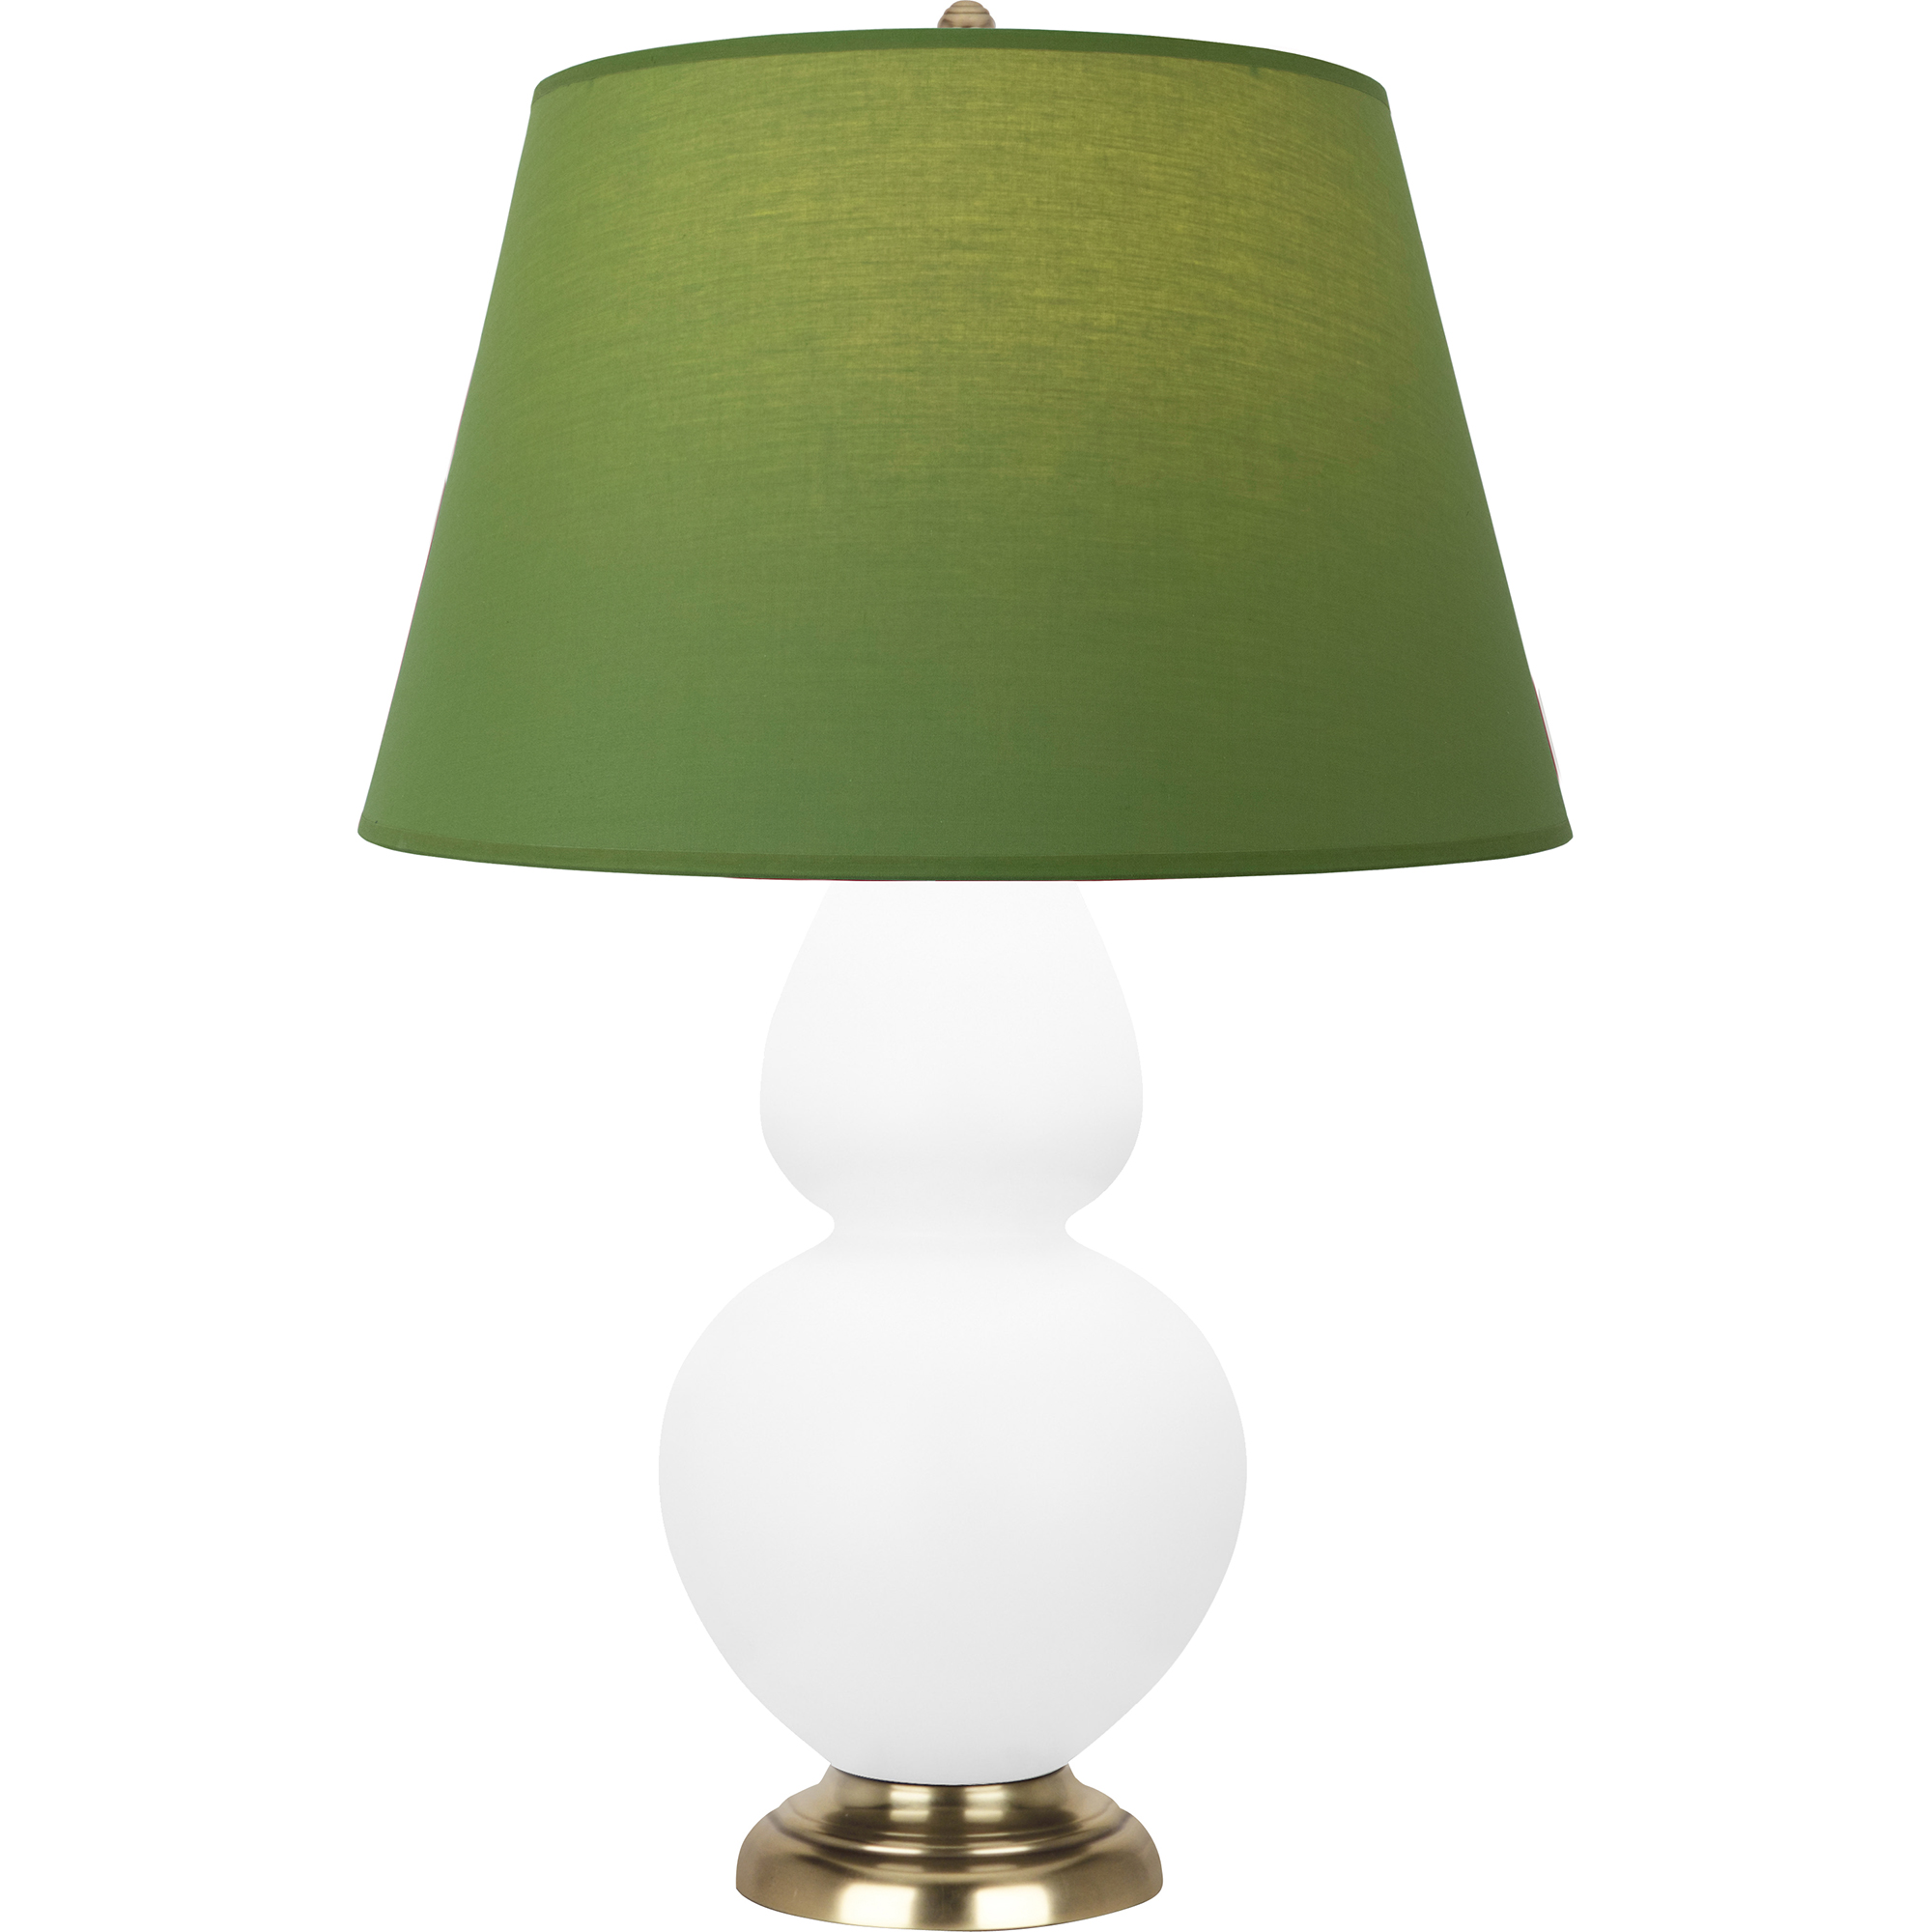 Double Gourd Table Lamp Style #MDY20G